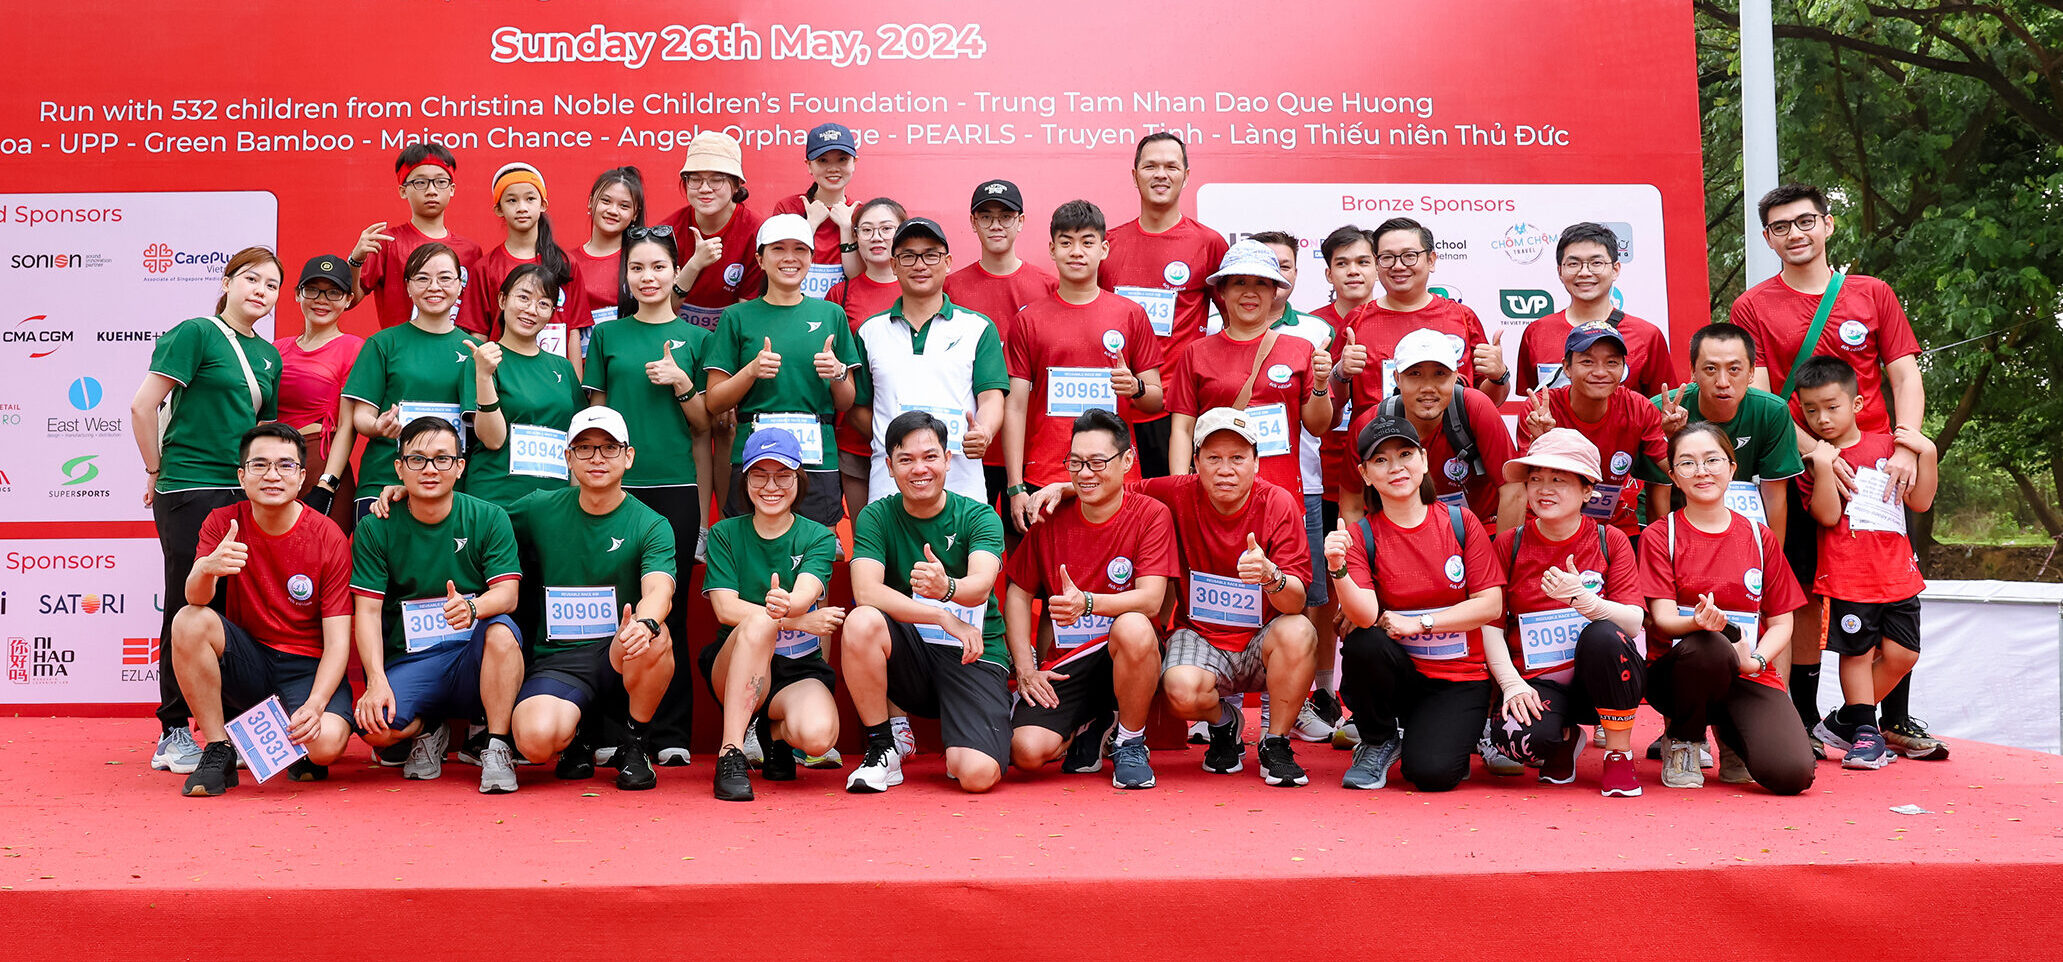 KCN VIETNAM SUPPORTS UNDERPRIVILEGED CHILDREN AT ANDROS THE LAKES RACE